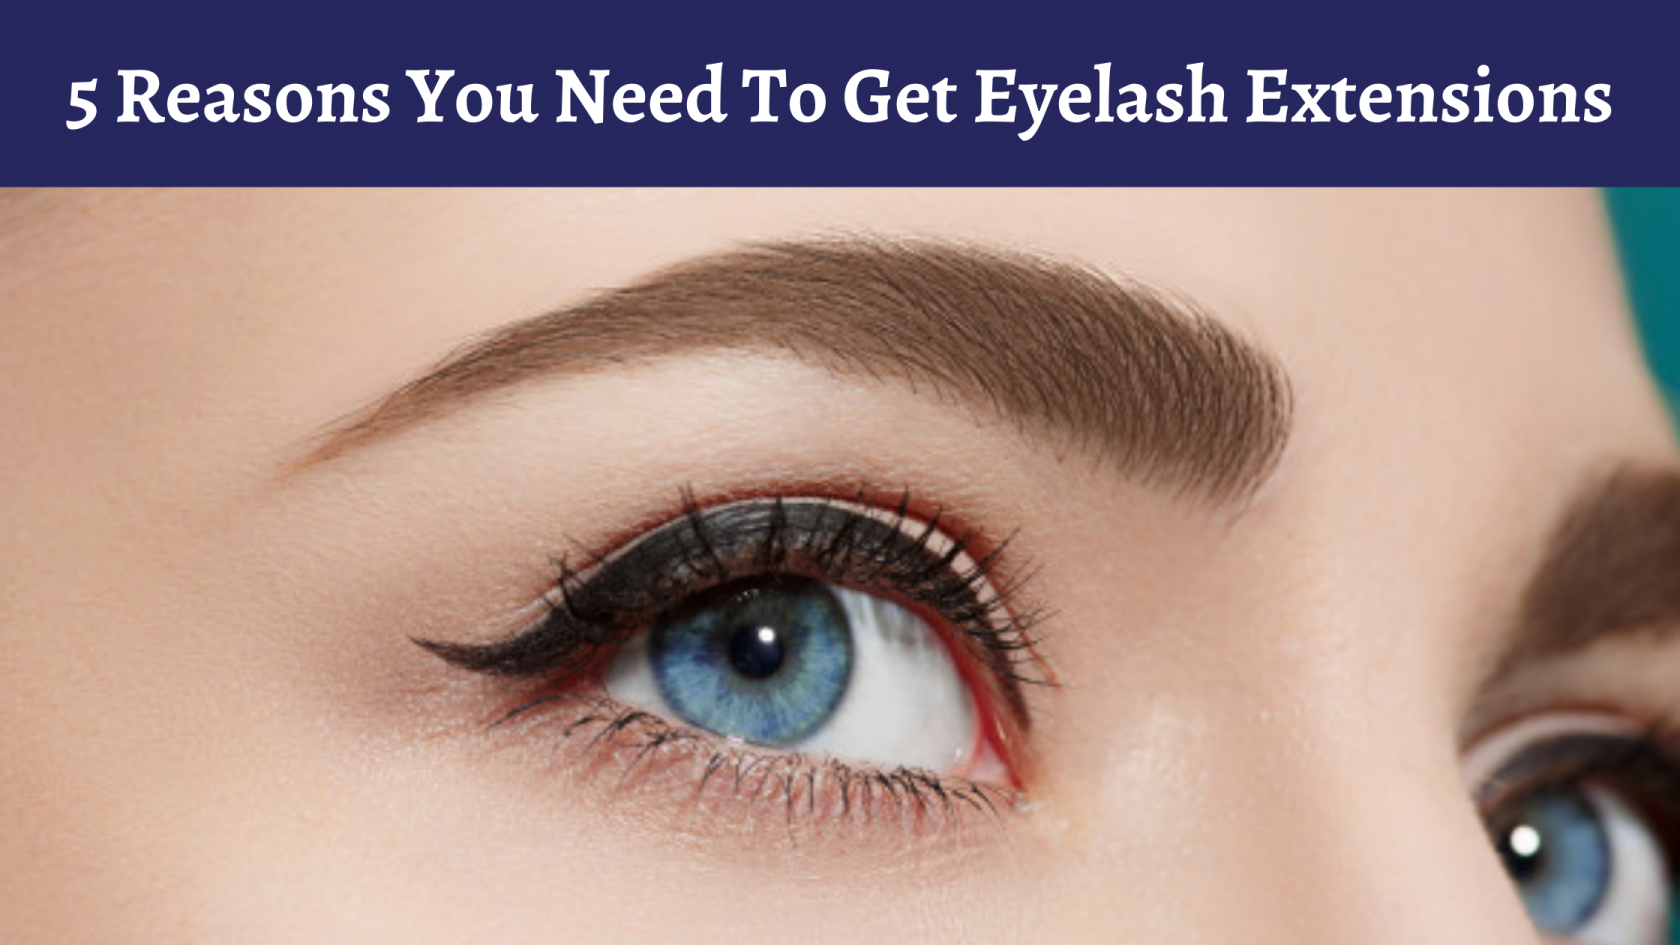 Reasons You Need To Get Eyelash Extensions